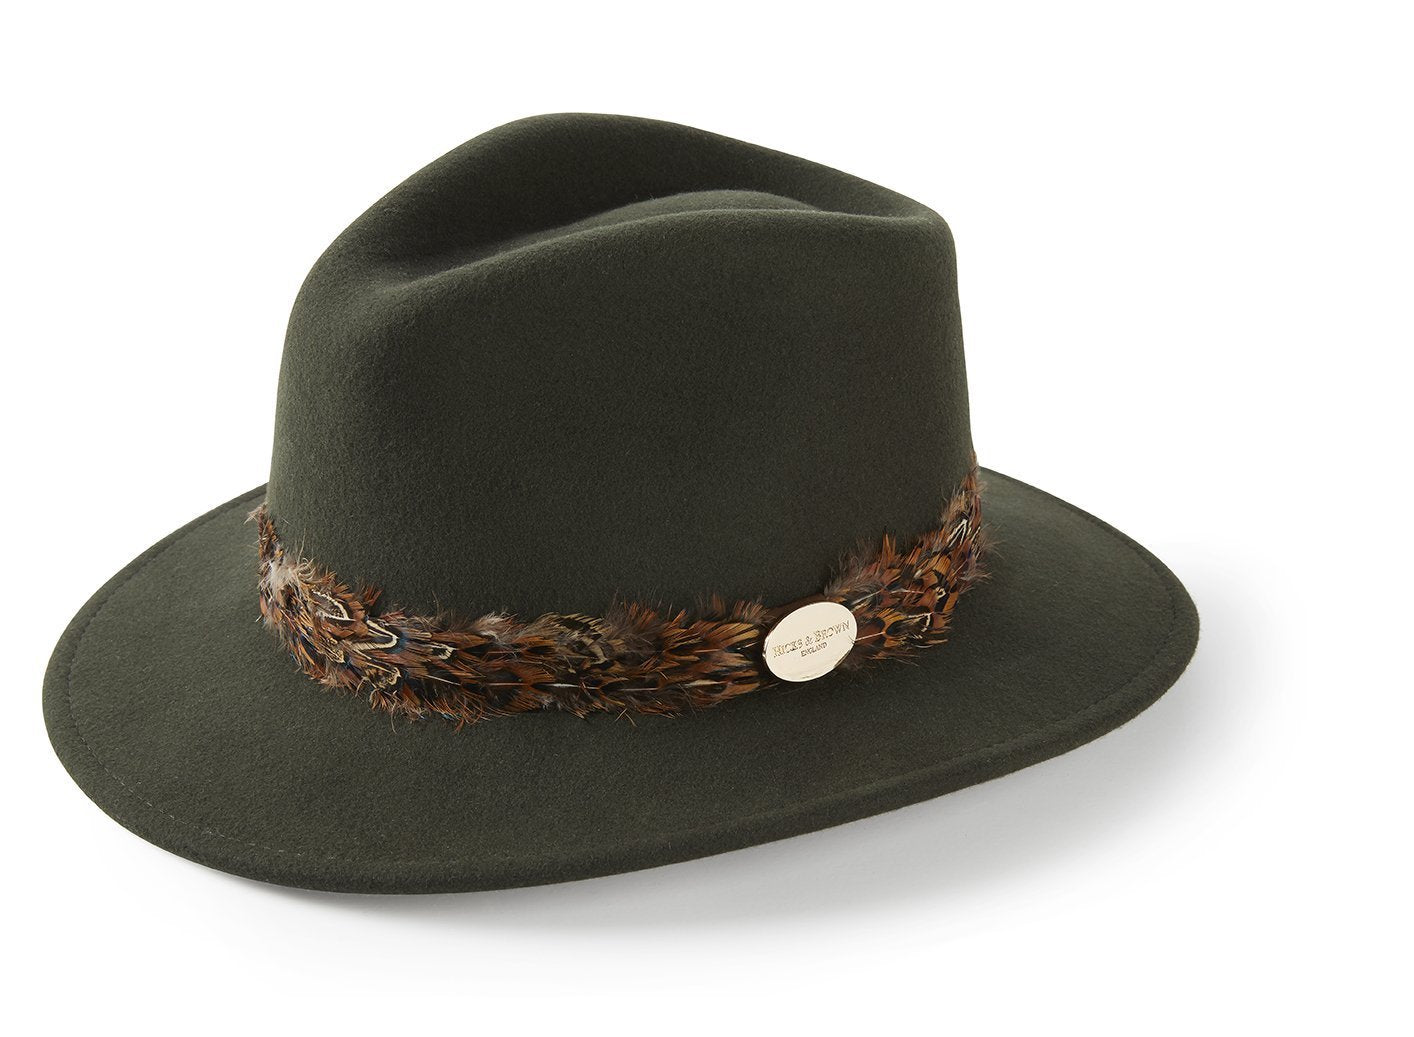 Hicks & Brown Fedora The Suffolk Fedora in Olive Green (Pheasant Feather Wrap)